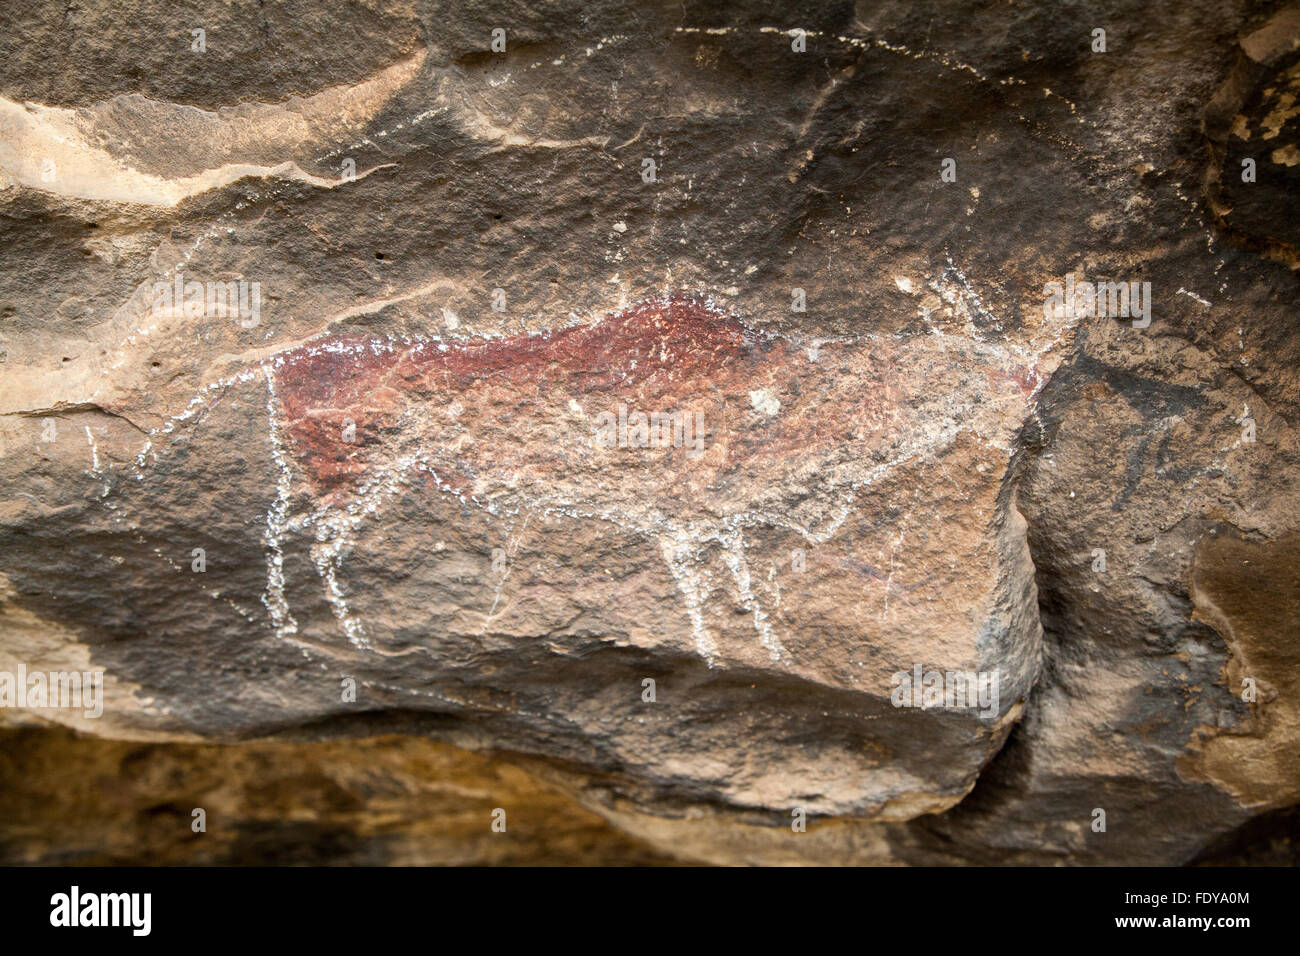 Ancient African eland rock art found on the walls of a overhang in Quthing, Lesotho, Africa Stock Photo